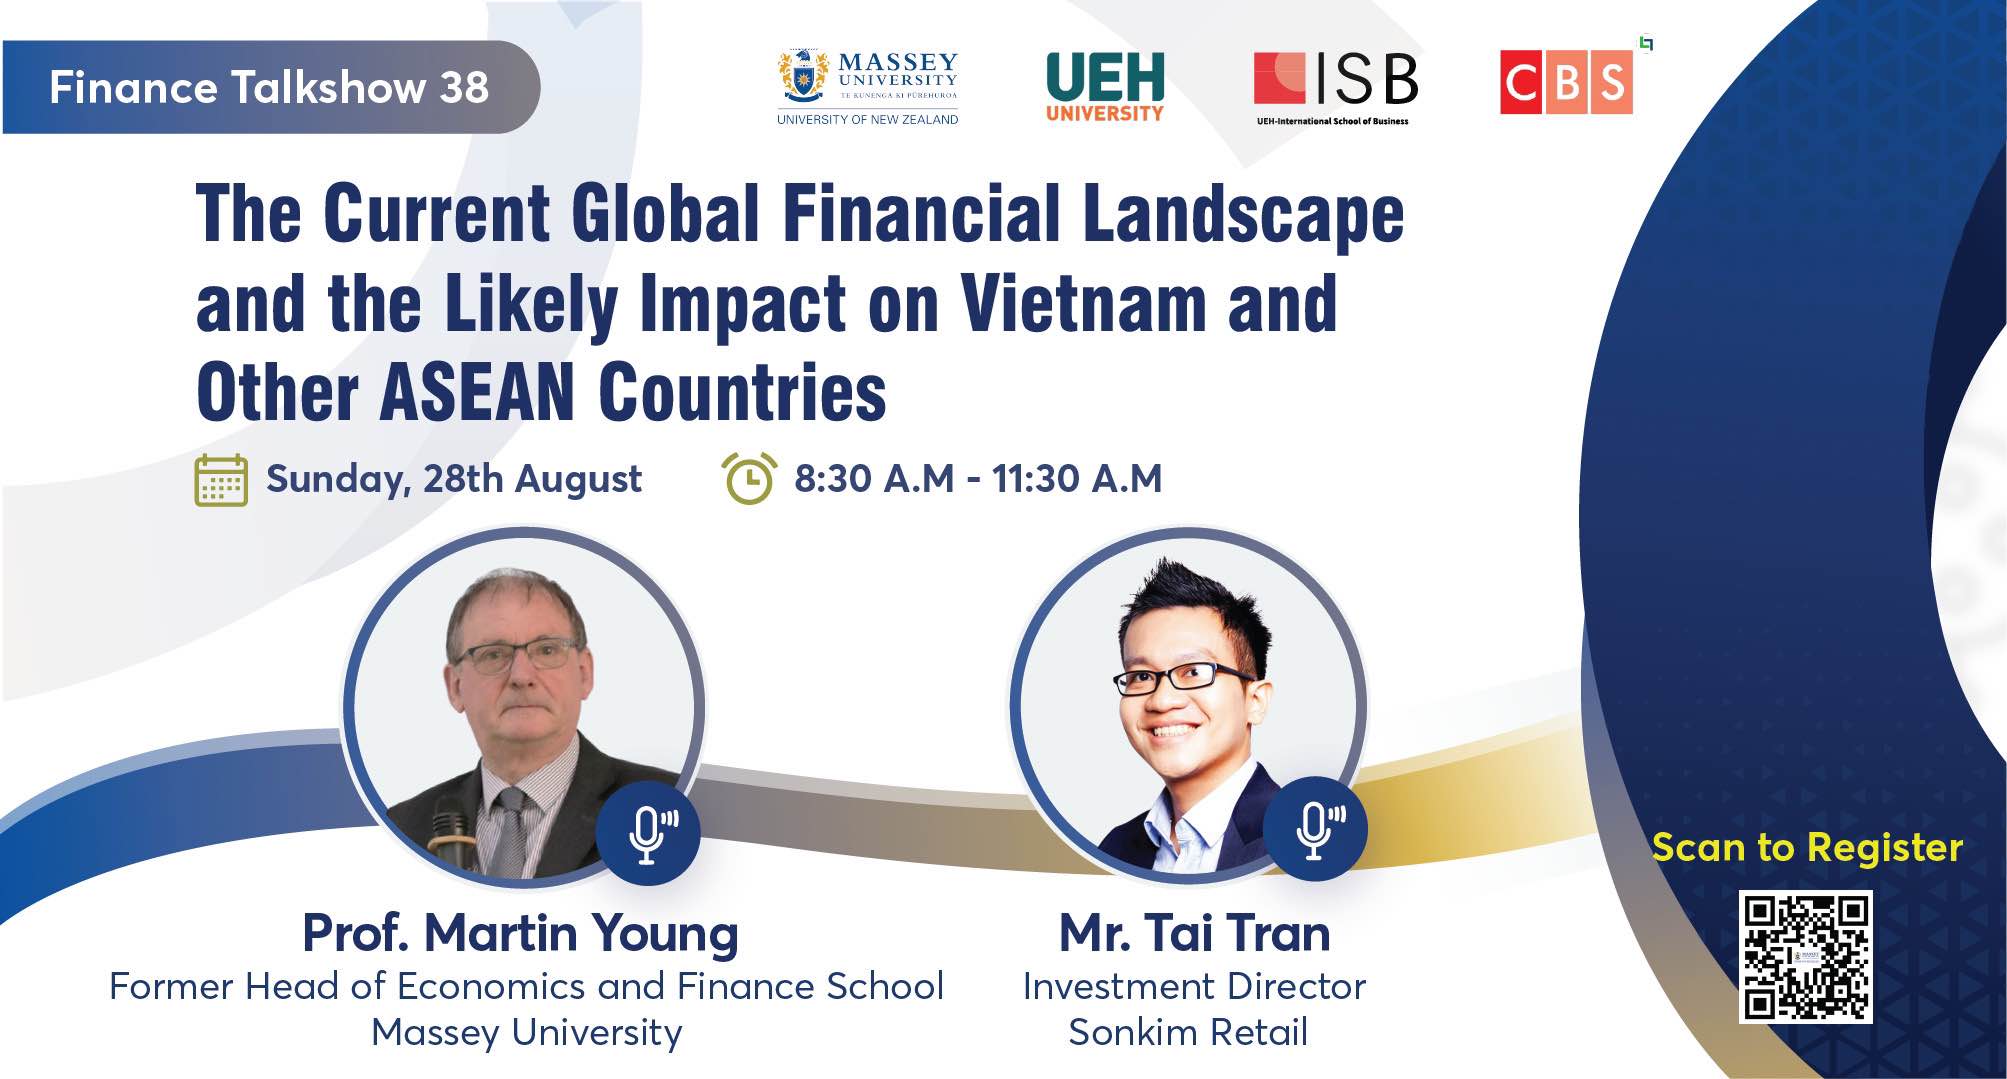 [𝐌𝐅𝐈𝐍 𝐓𝐚𝐥𝐤𝐬𝐡𝐨𝐰 𝟑𝟖] The Current Global Financial Landscape and the Likely Impact on Vietnam and Other ASEAN Countries Countries